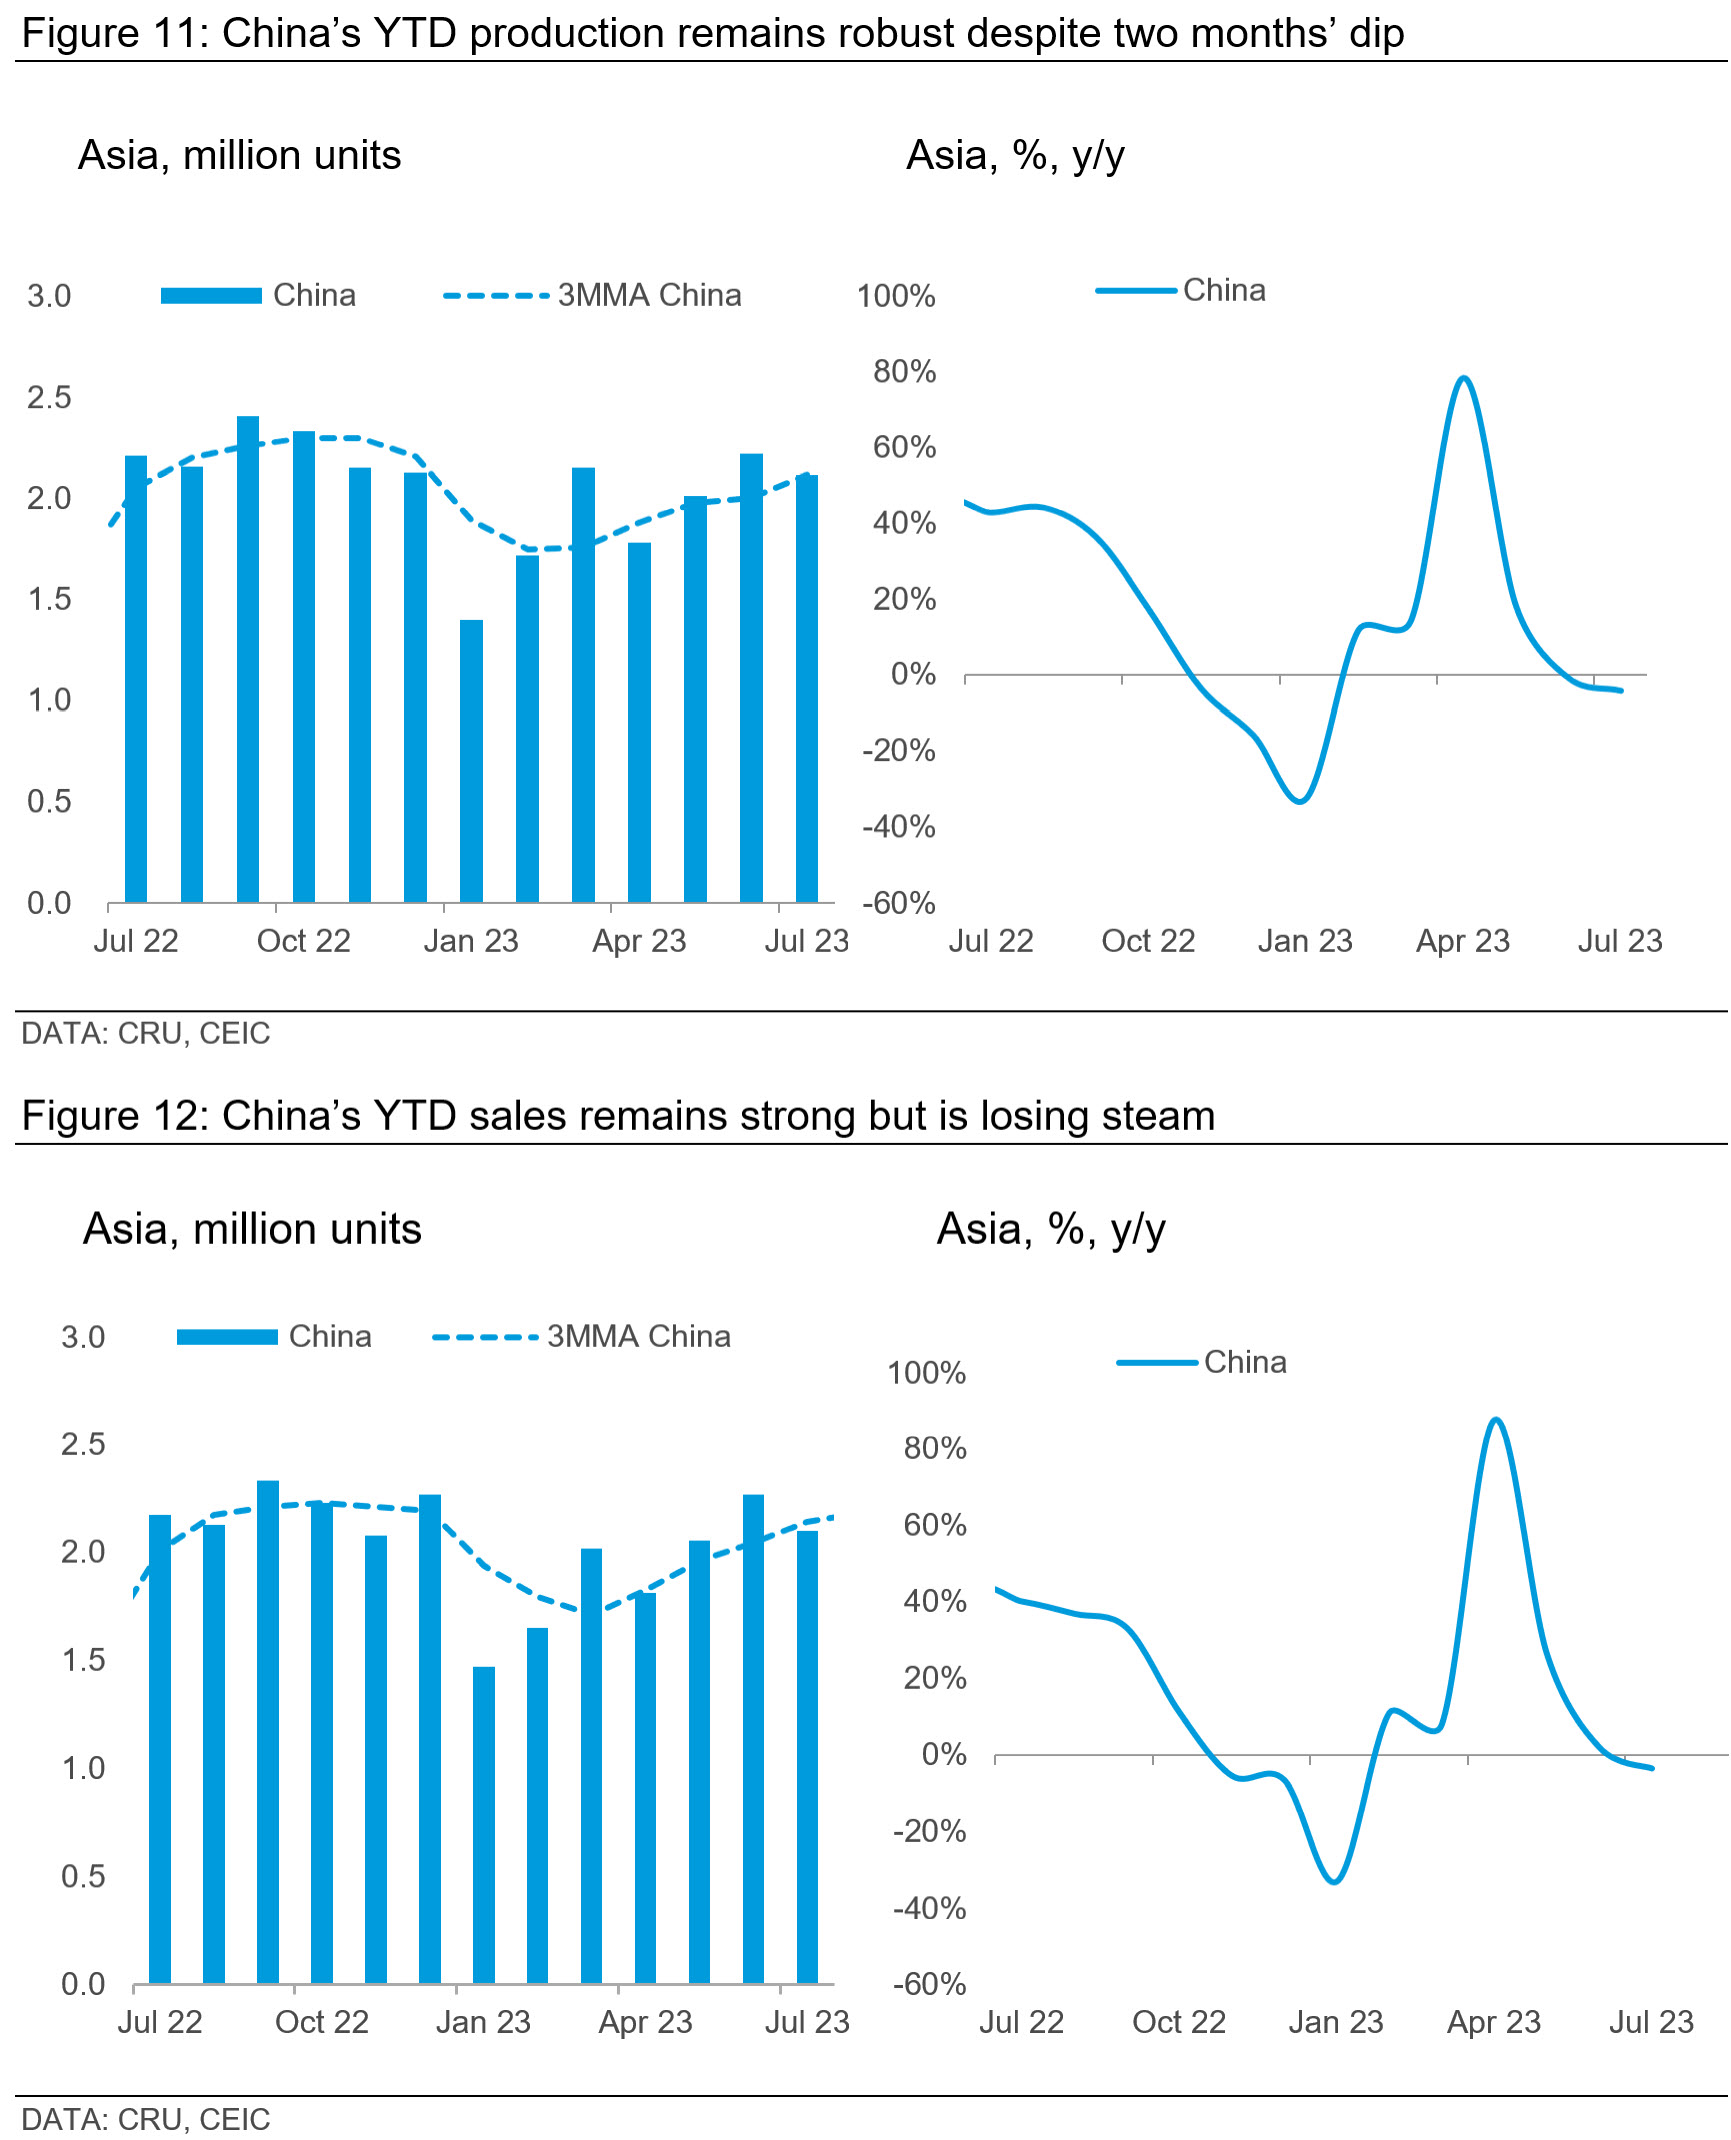 Graphs showing China's YTD production and sales